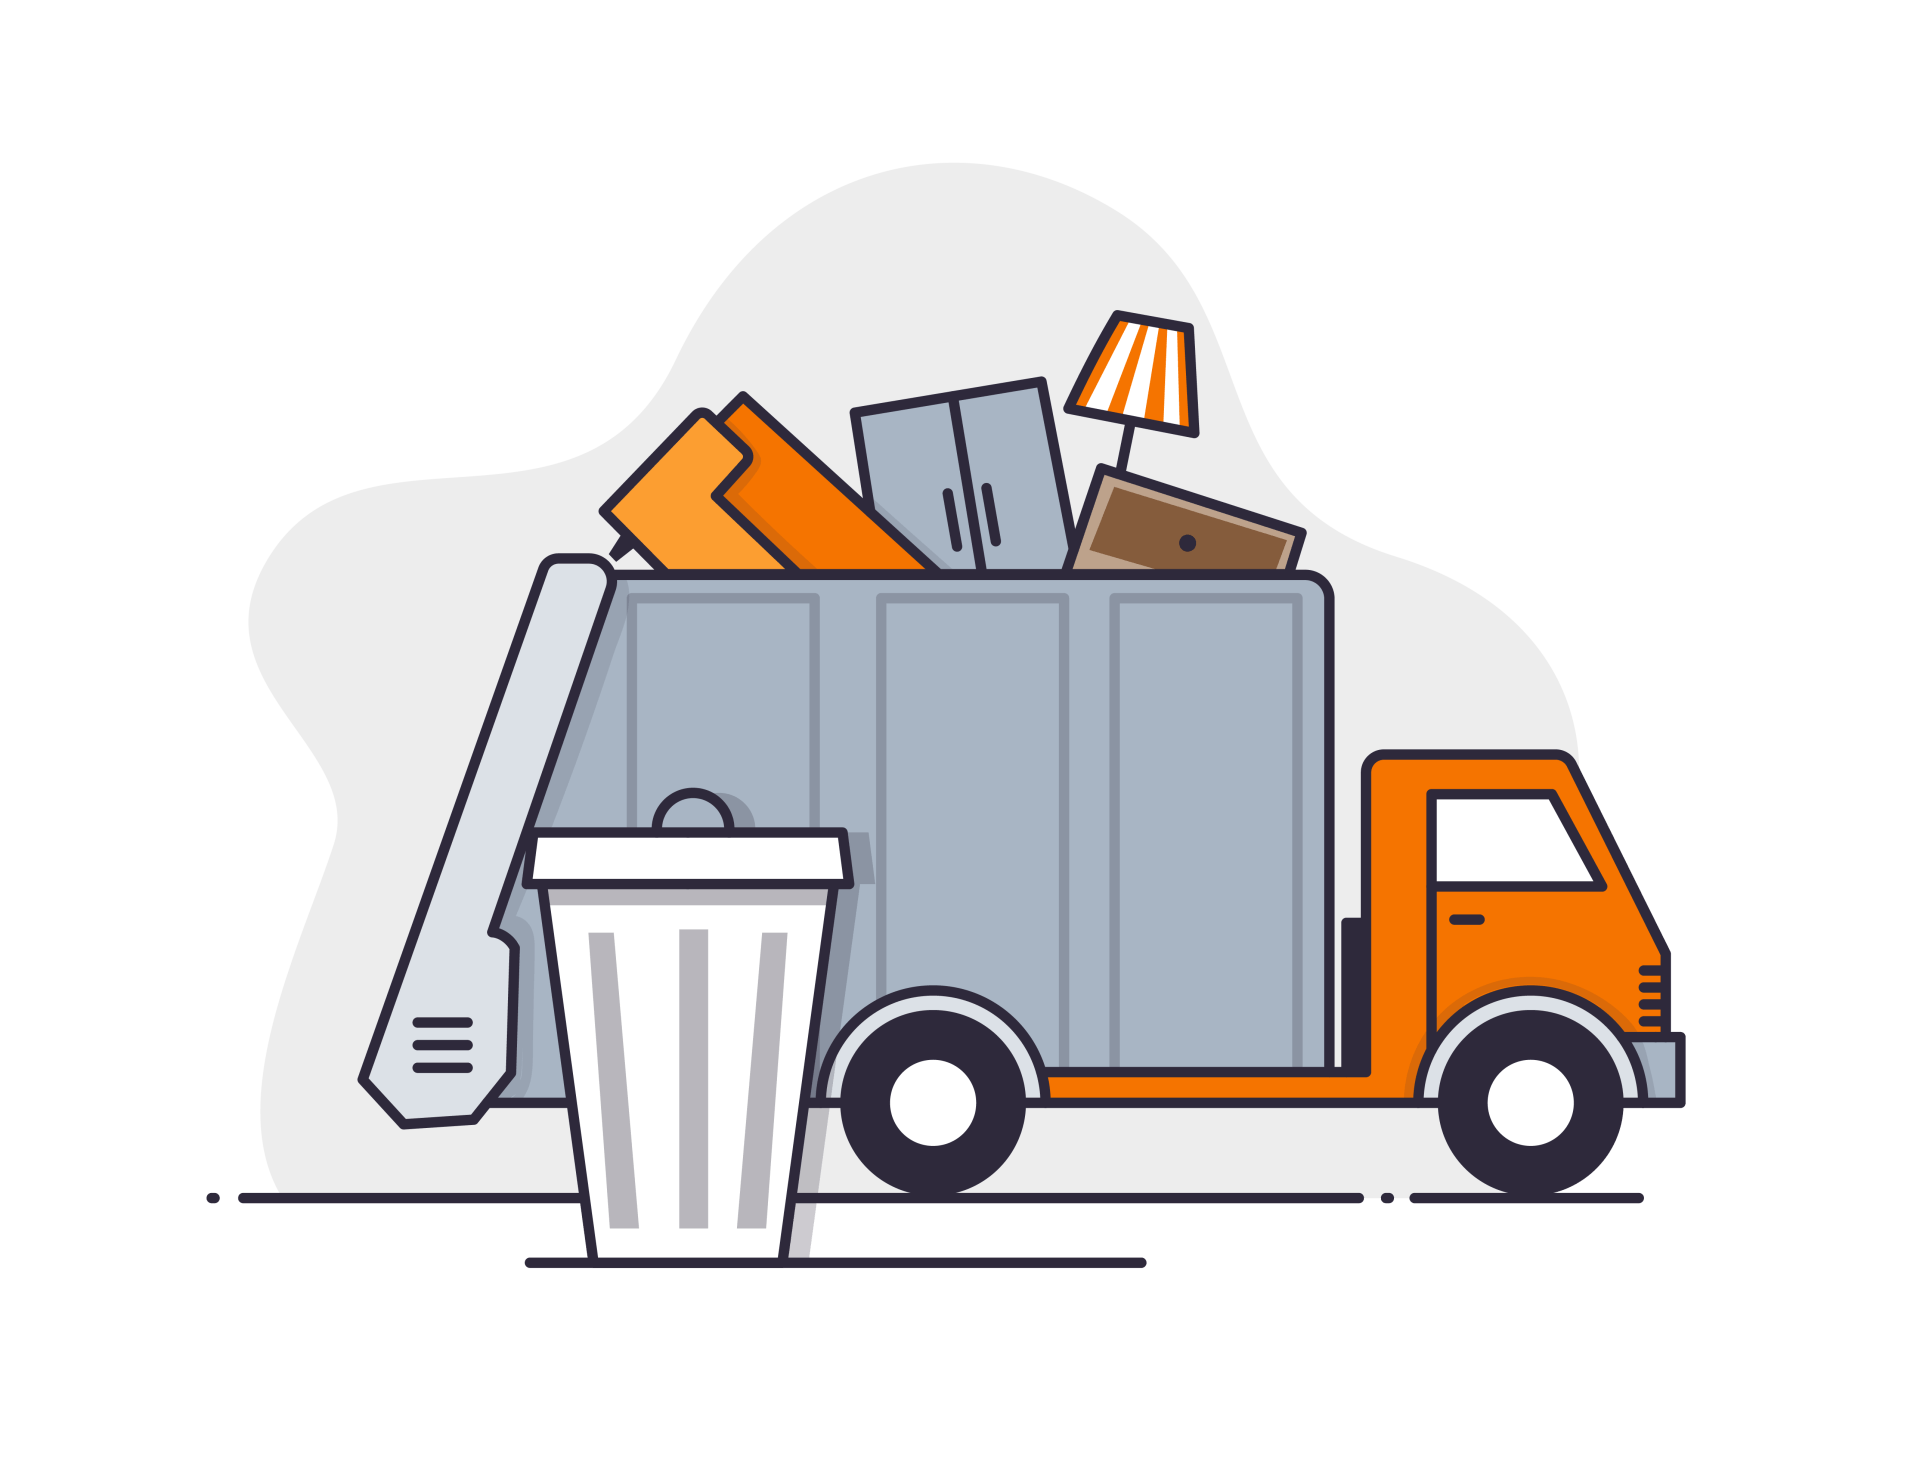 Indiana Junk Cleanout Services